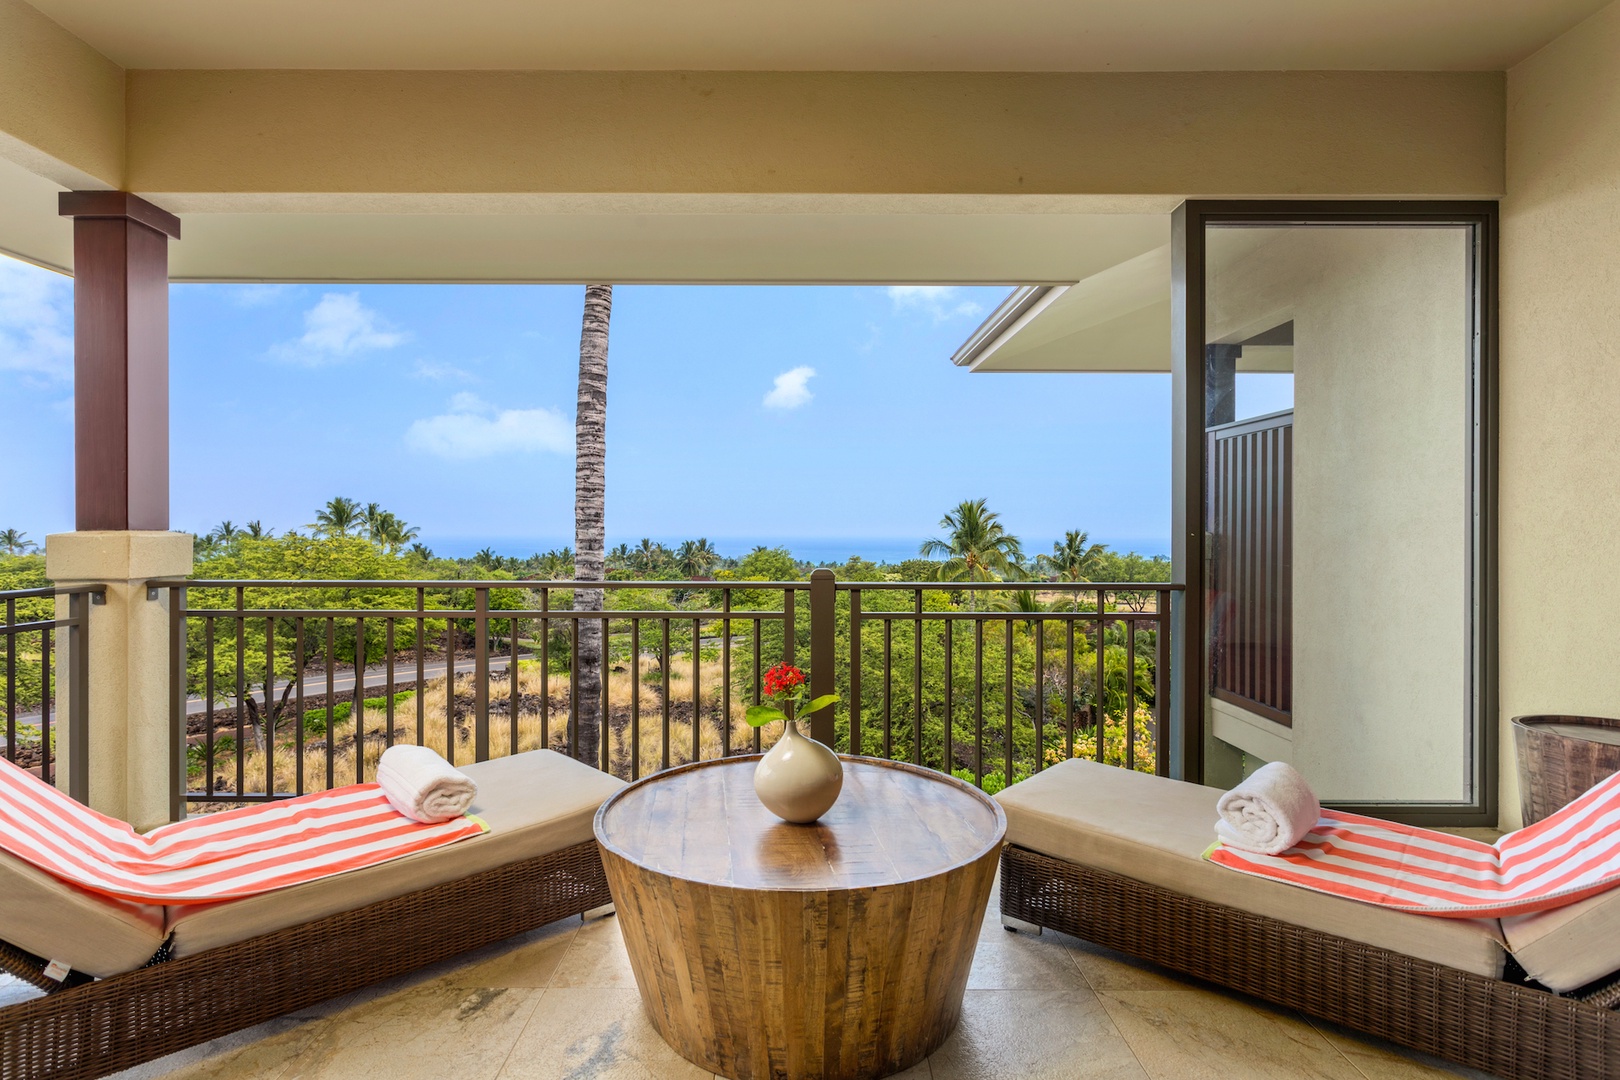 Kailua Kona Vacation Rentals, 3BD Hainoa Villa (2901D) at Four Seasons Resort at Hualalai - Primary suite private deck - find your zen time!